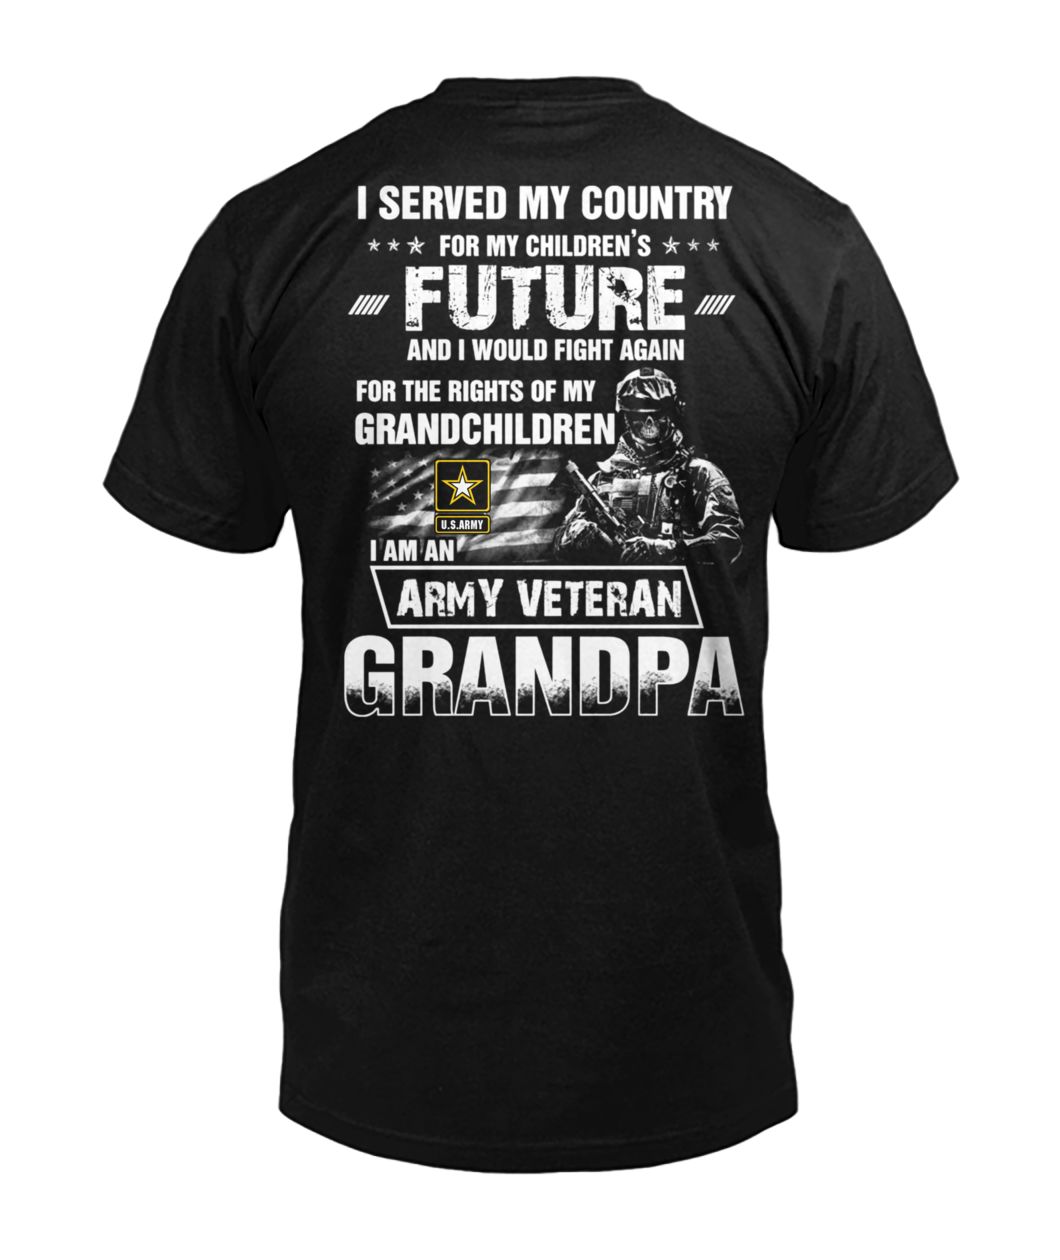 I served my country for my children’s future and I would fight again I am an army veteran grandpa U.S. army soldier mens v-neck